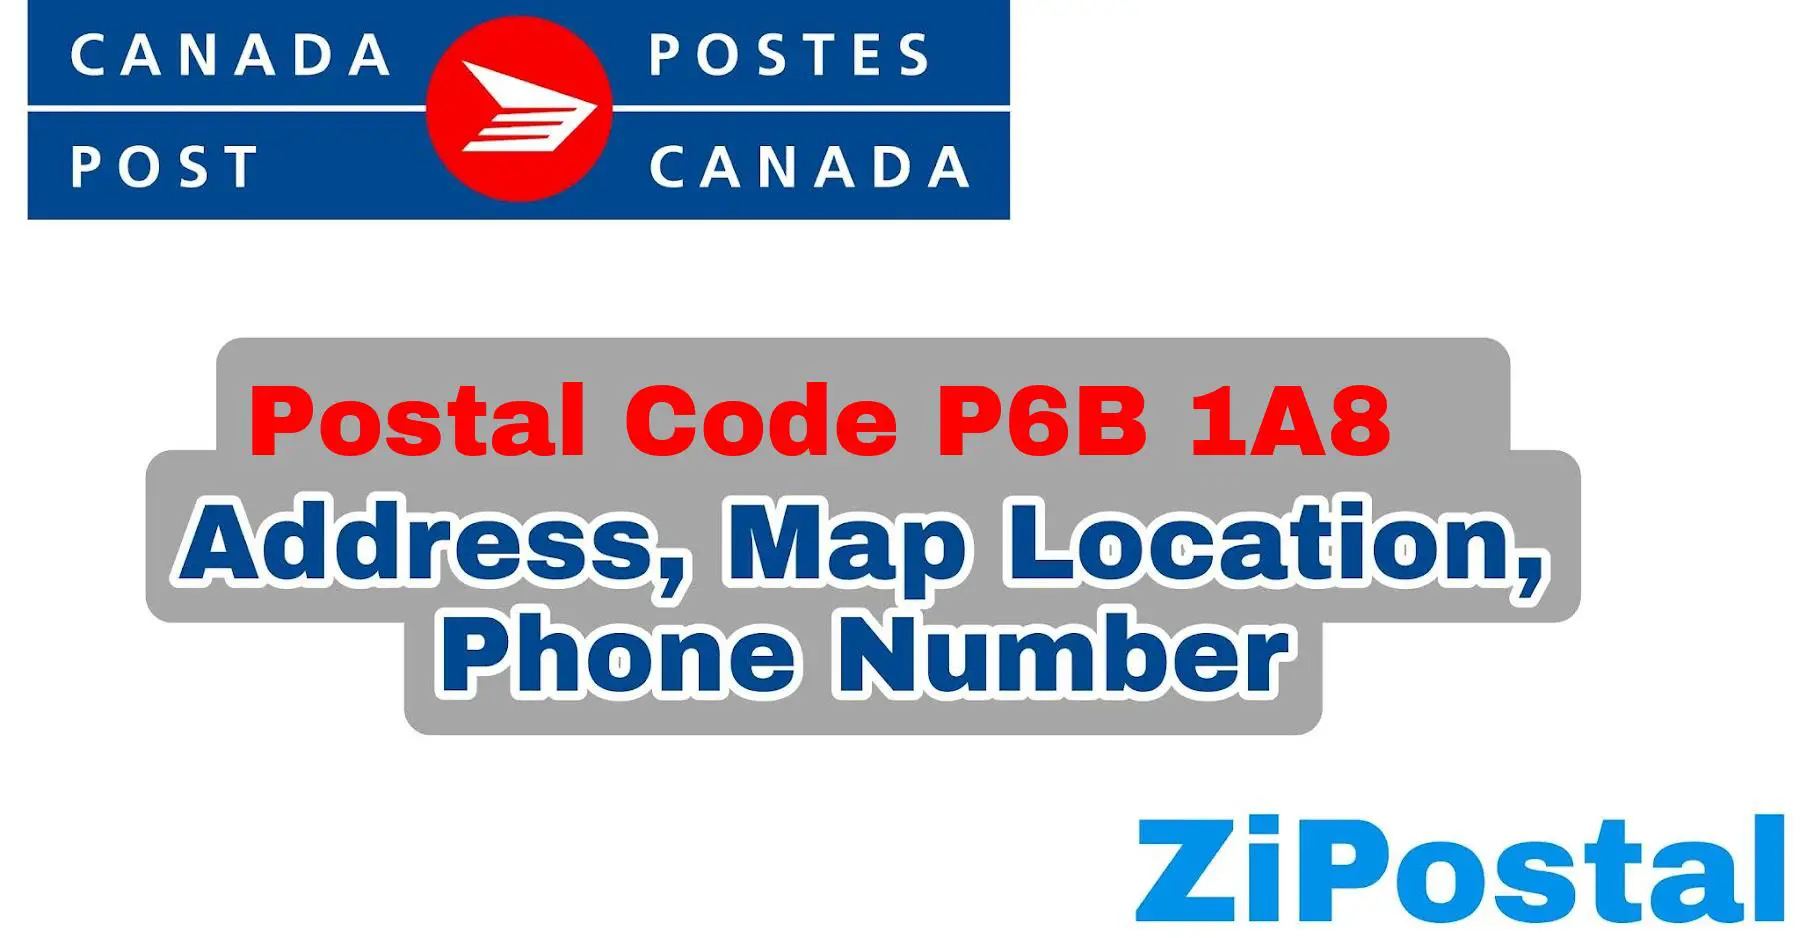 Postal Code P6B 1A8 Address Map Location and Phone Number